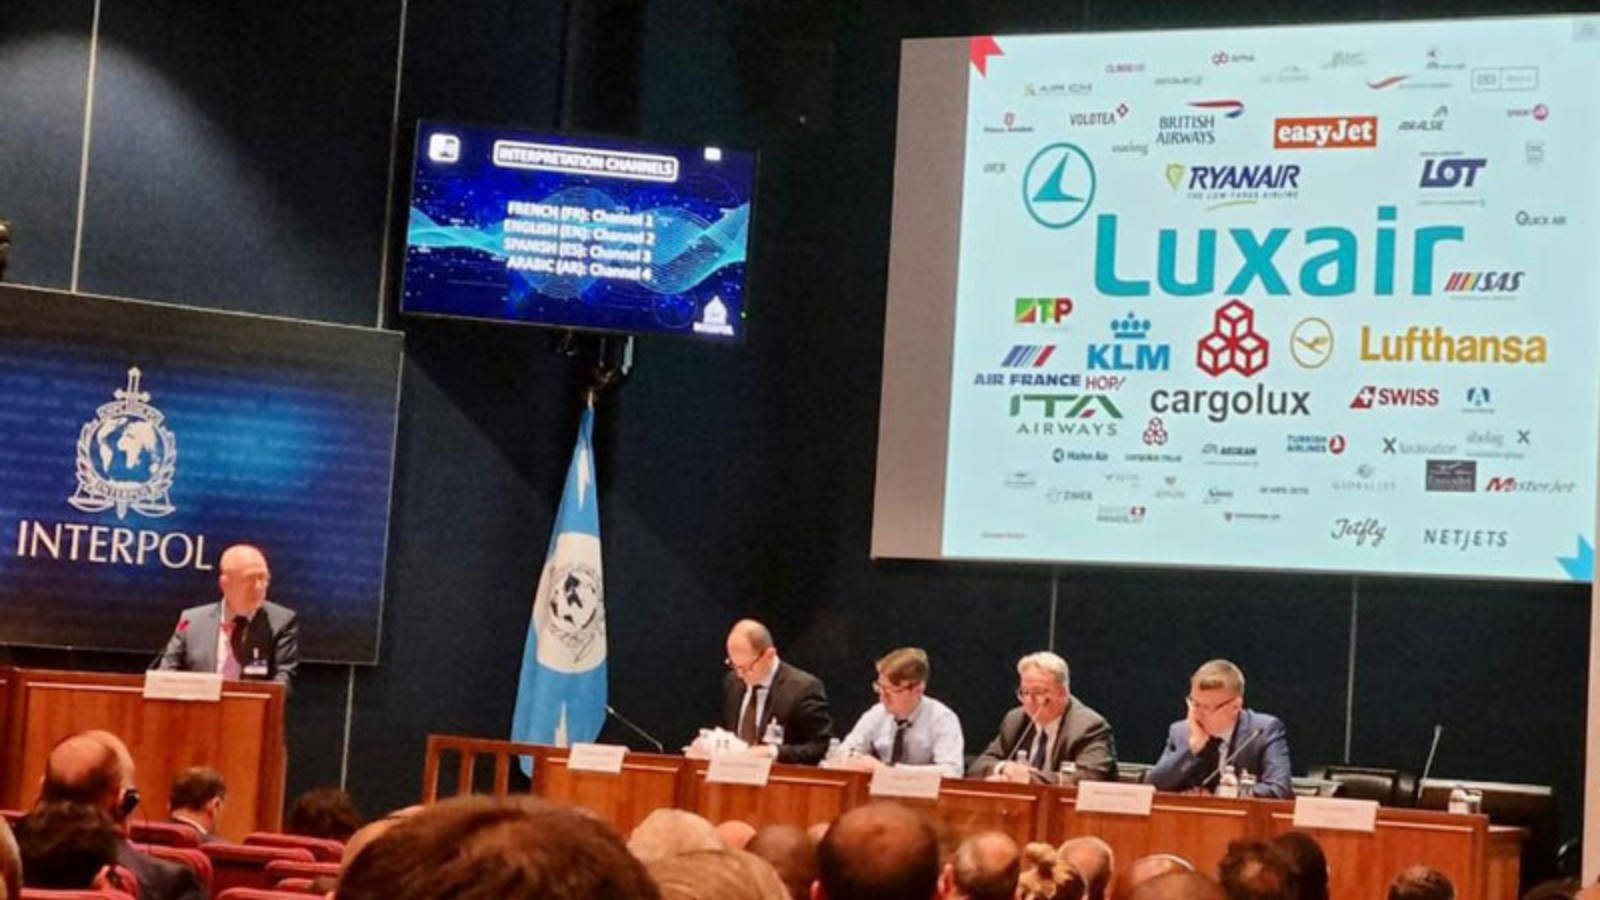 Paraguay present at the Second Joint ICAO/INTERPOL Forum held in France